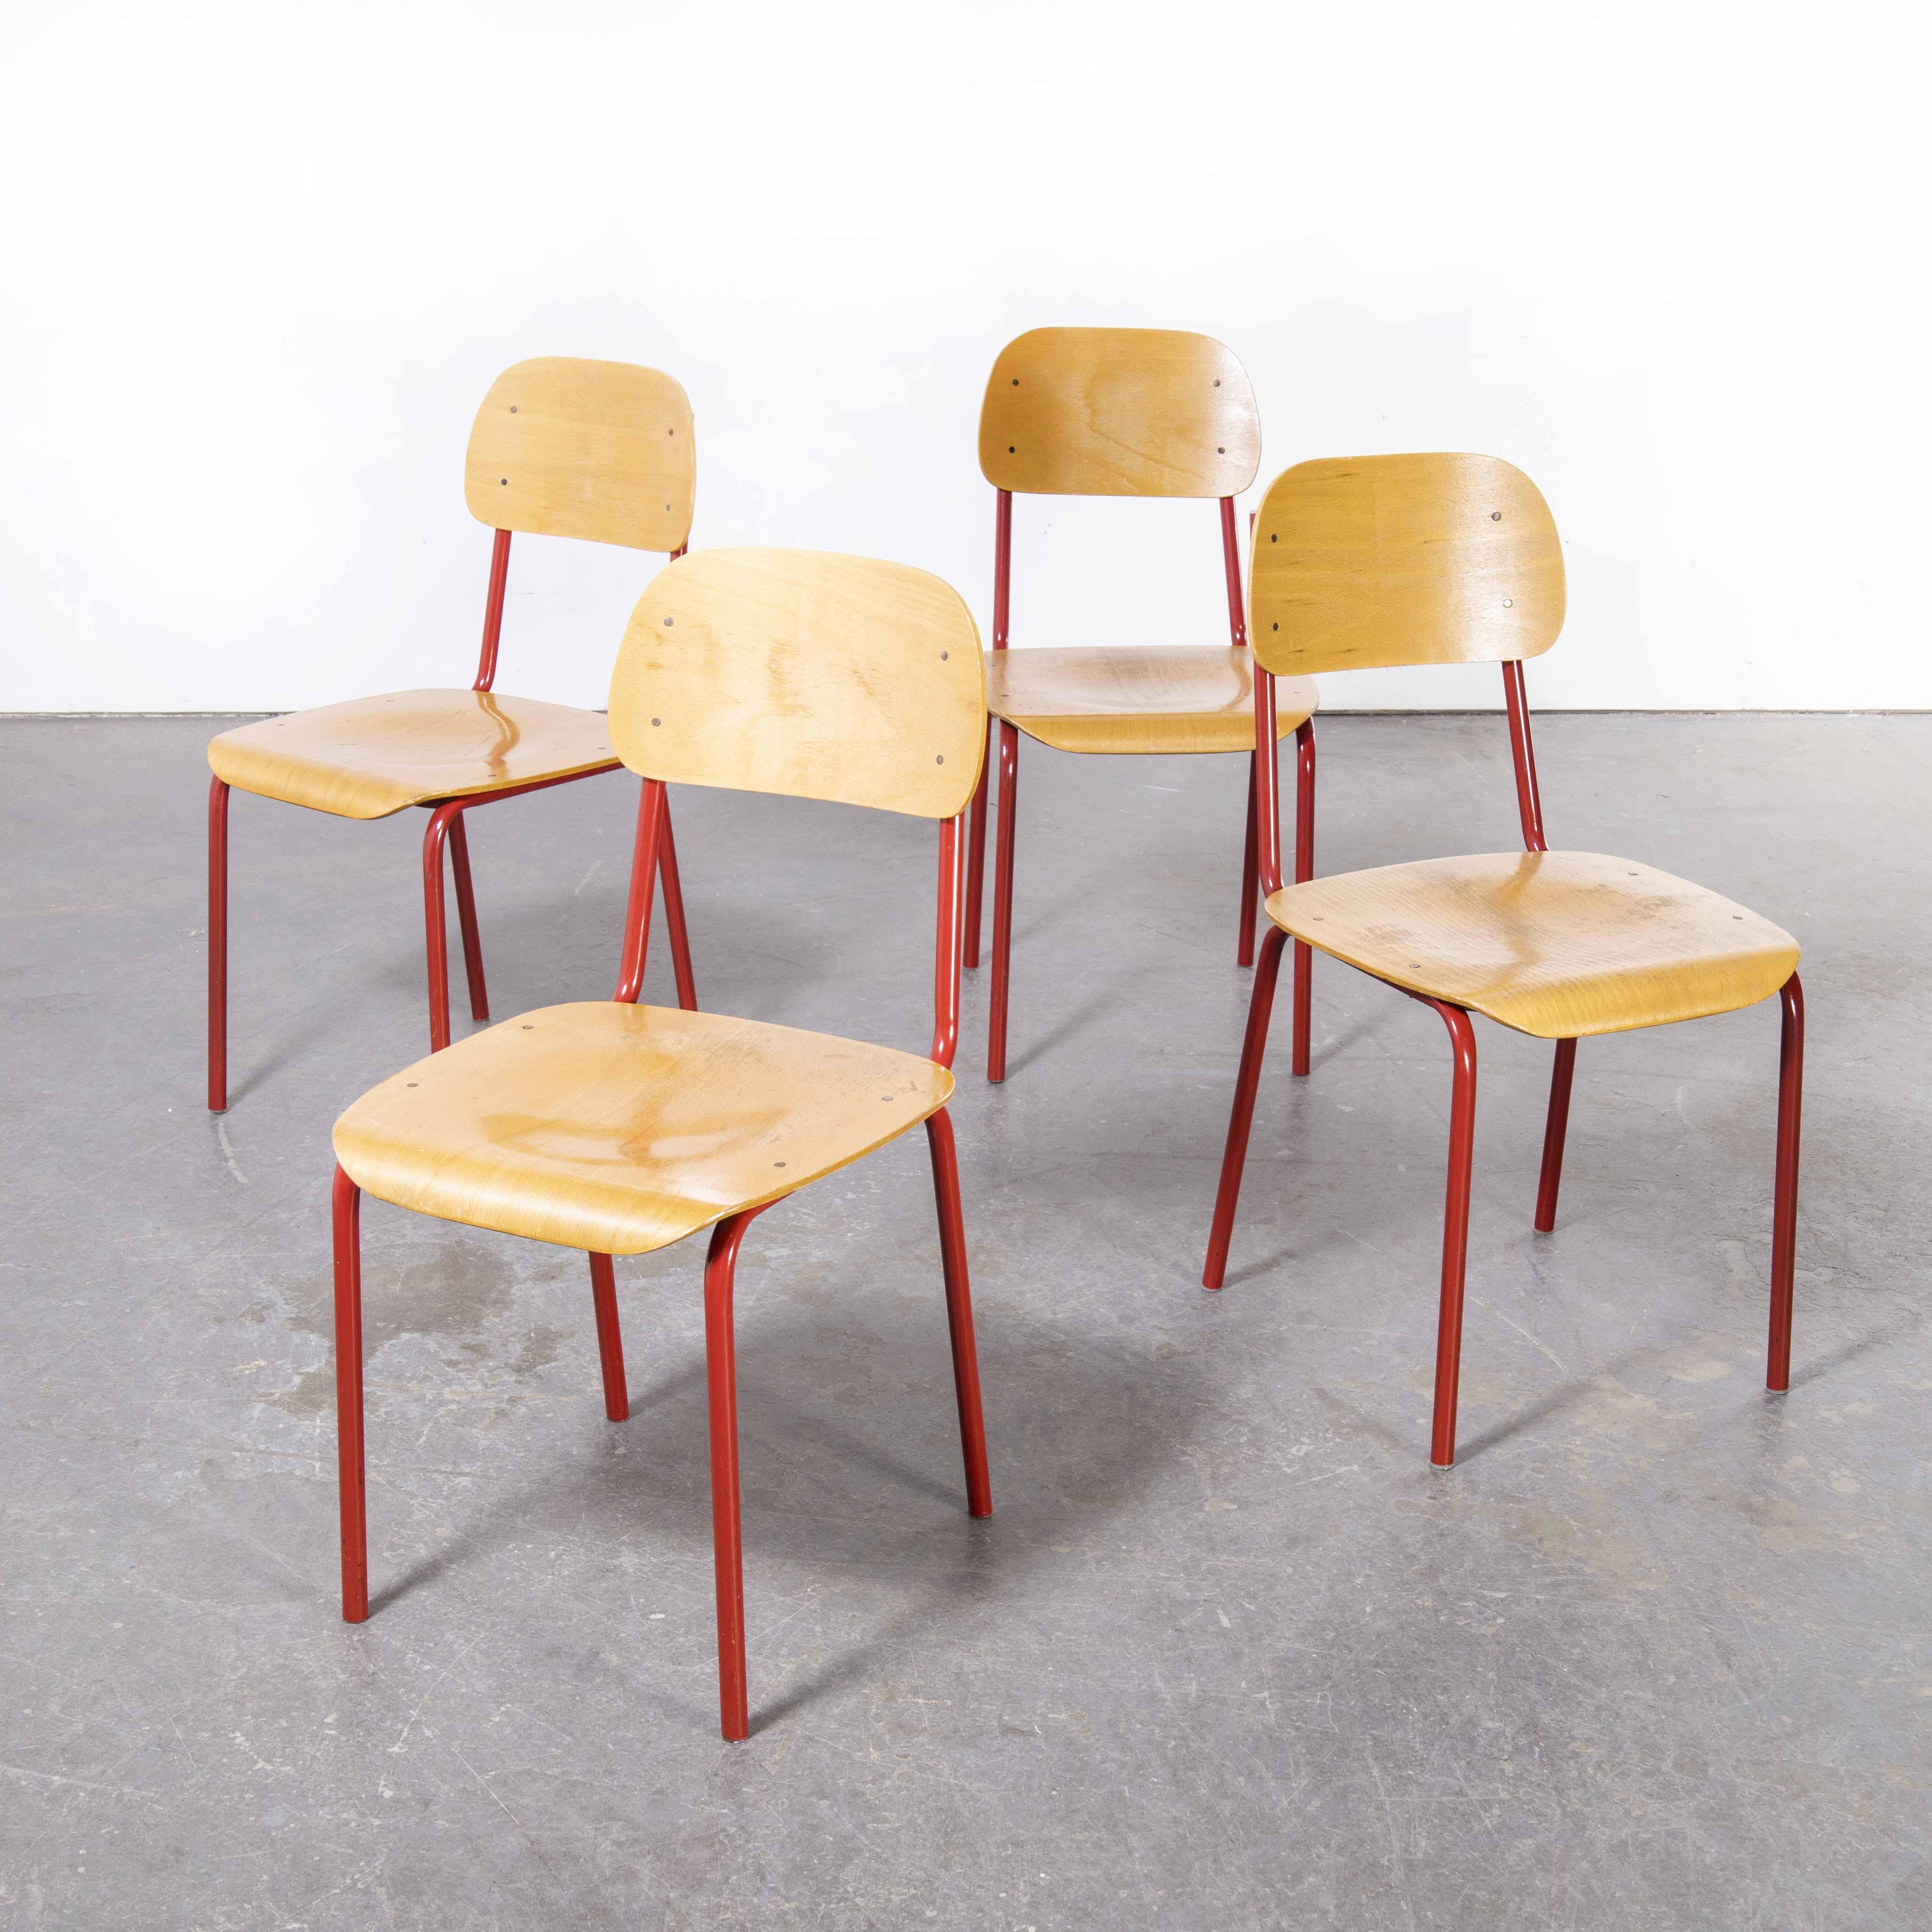 1970's Czech Industrial Stacking Chairs, Red, Set of Four For Sale 4